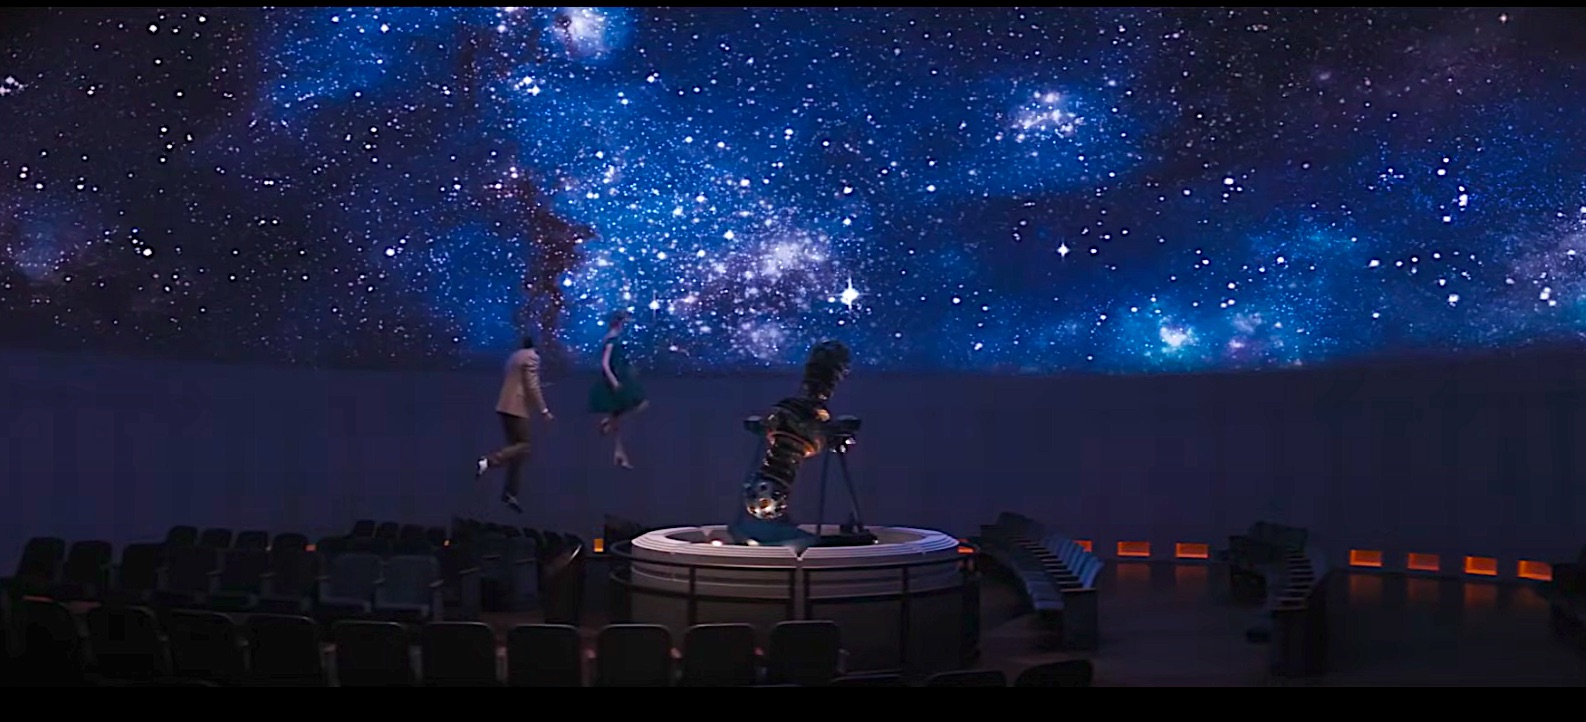 The two of them appear on the planetarium screen, where the stars shine.